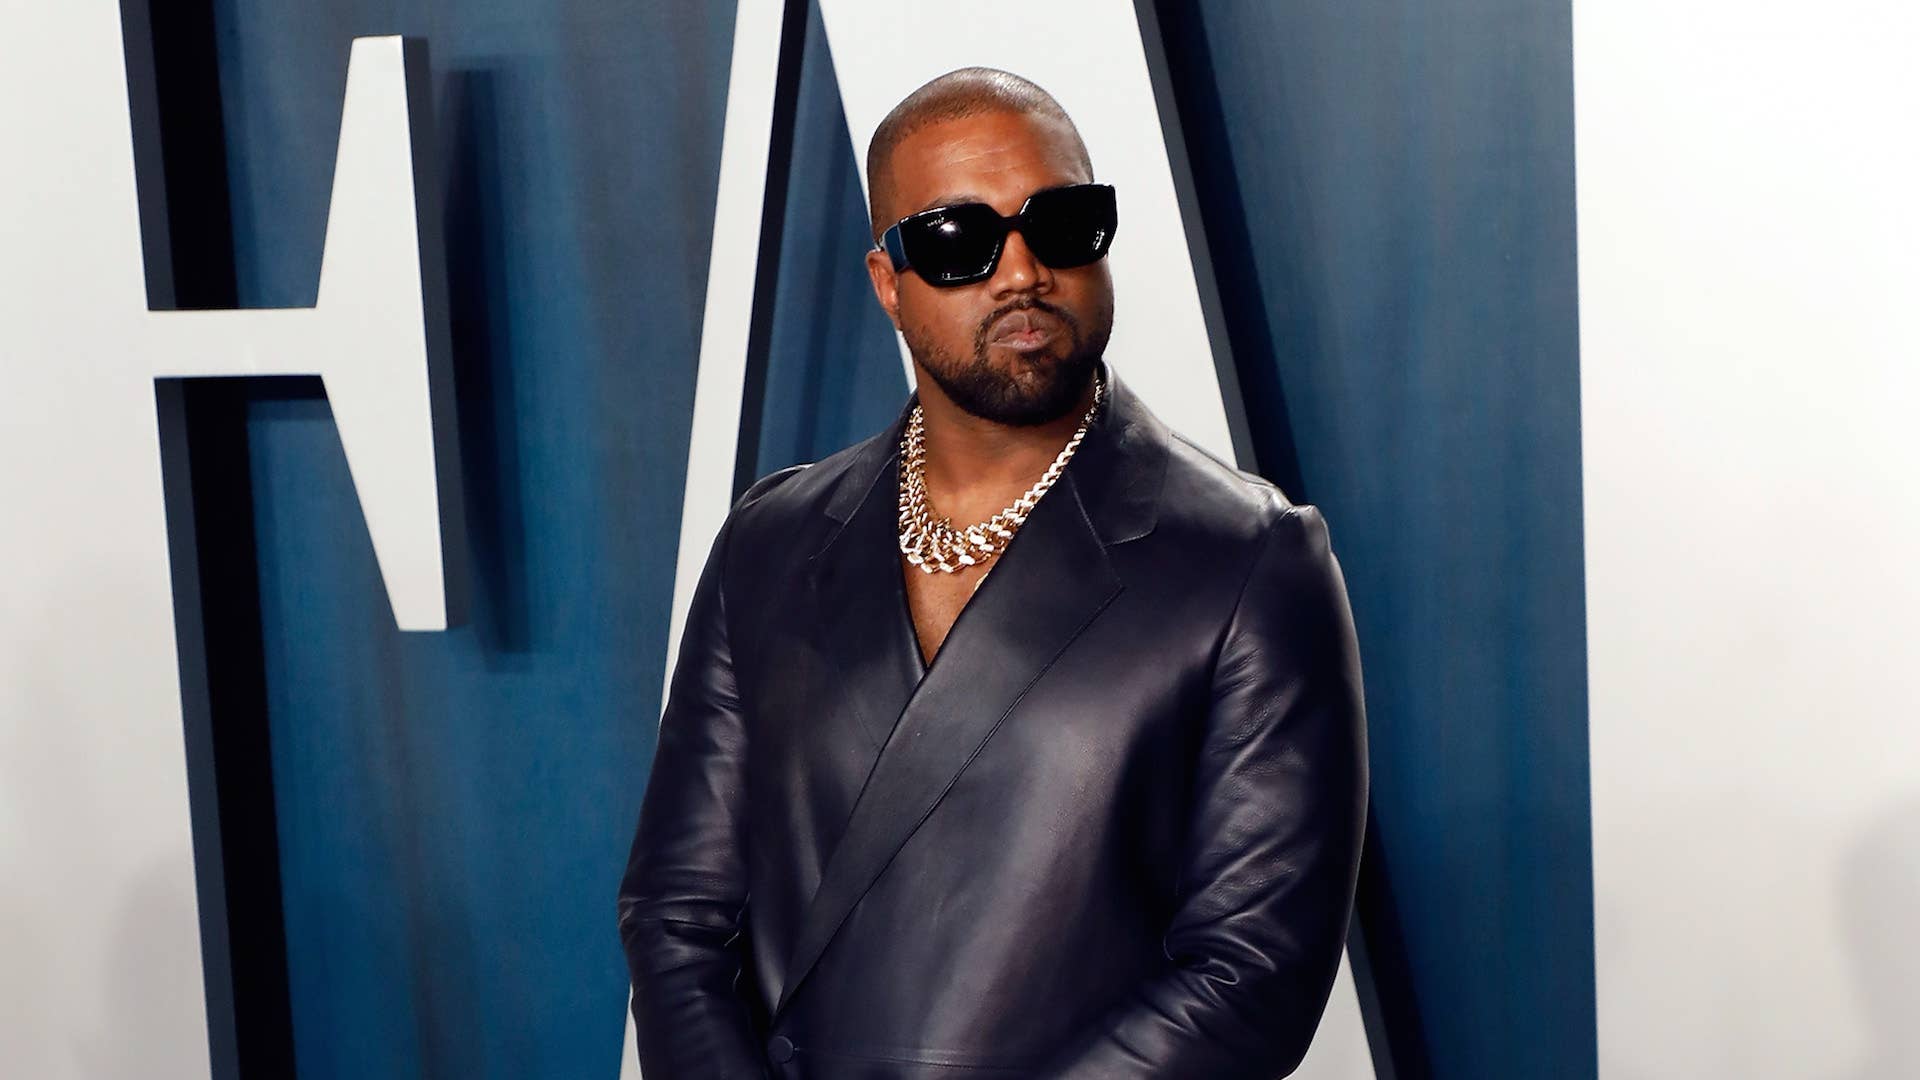 Kanye West attends the 2020 Vanity Fair Oscar Party